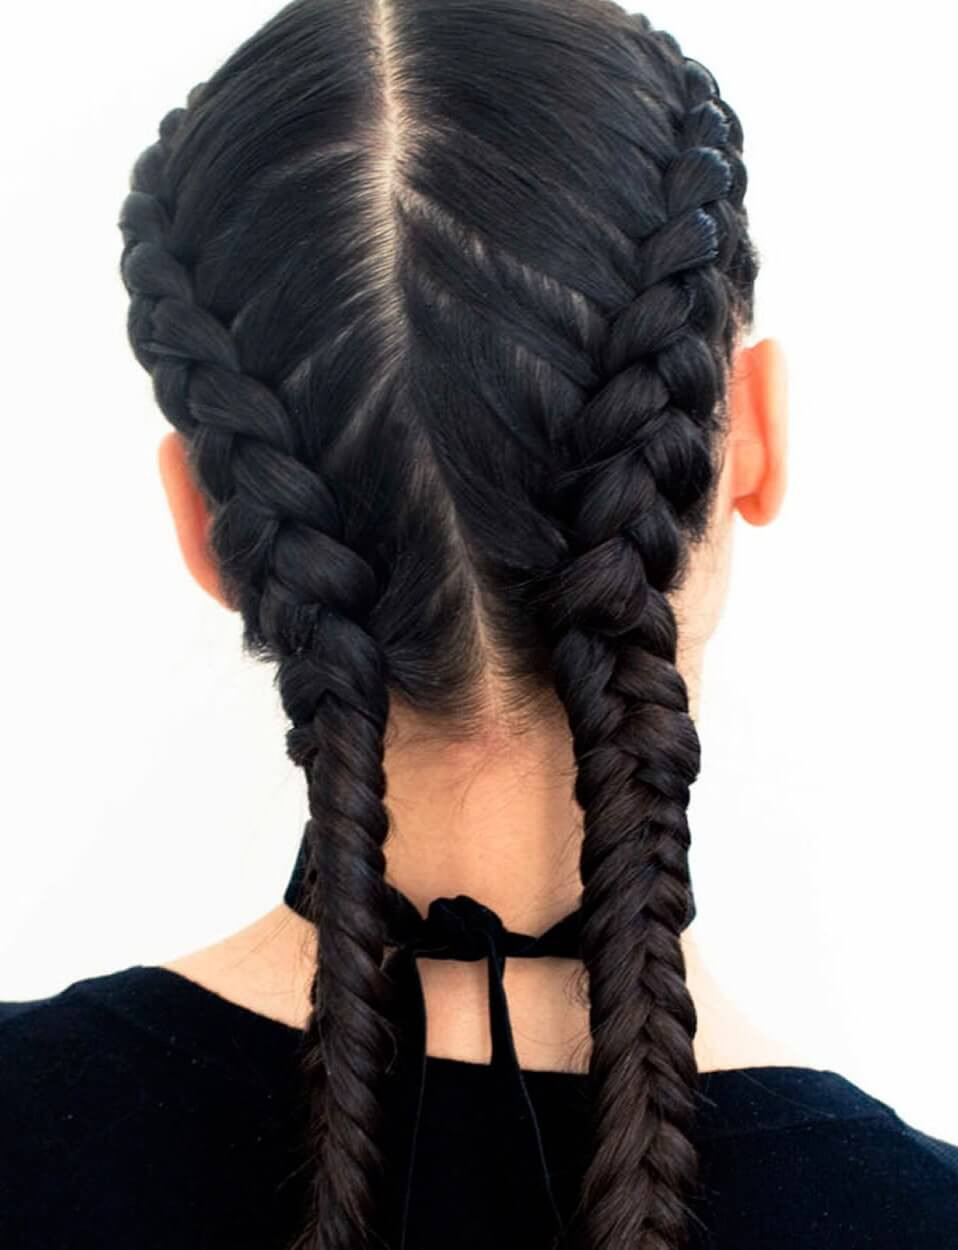 French Braid Hairstyles
 How to Braid Learn To Make 3 Types of Braids